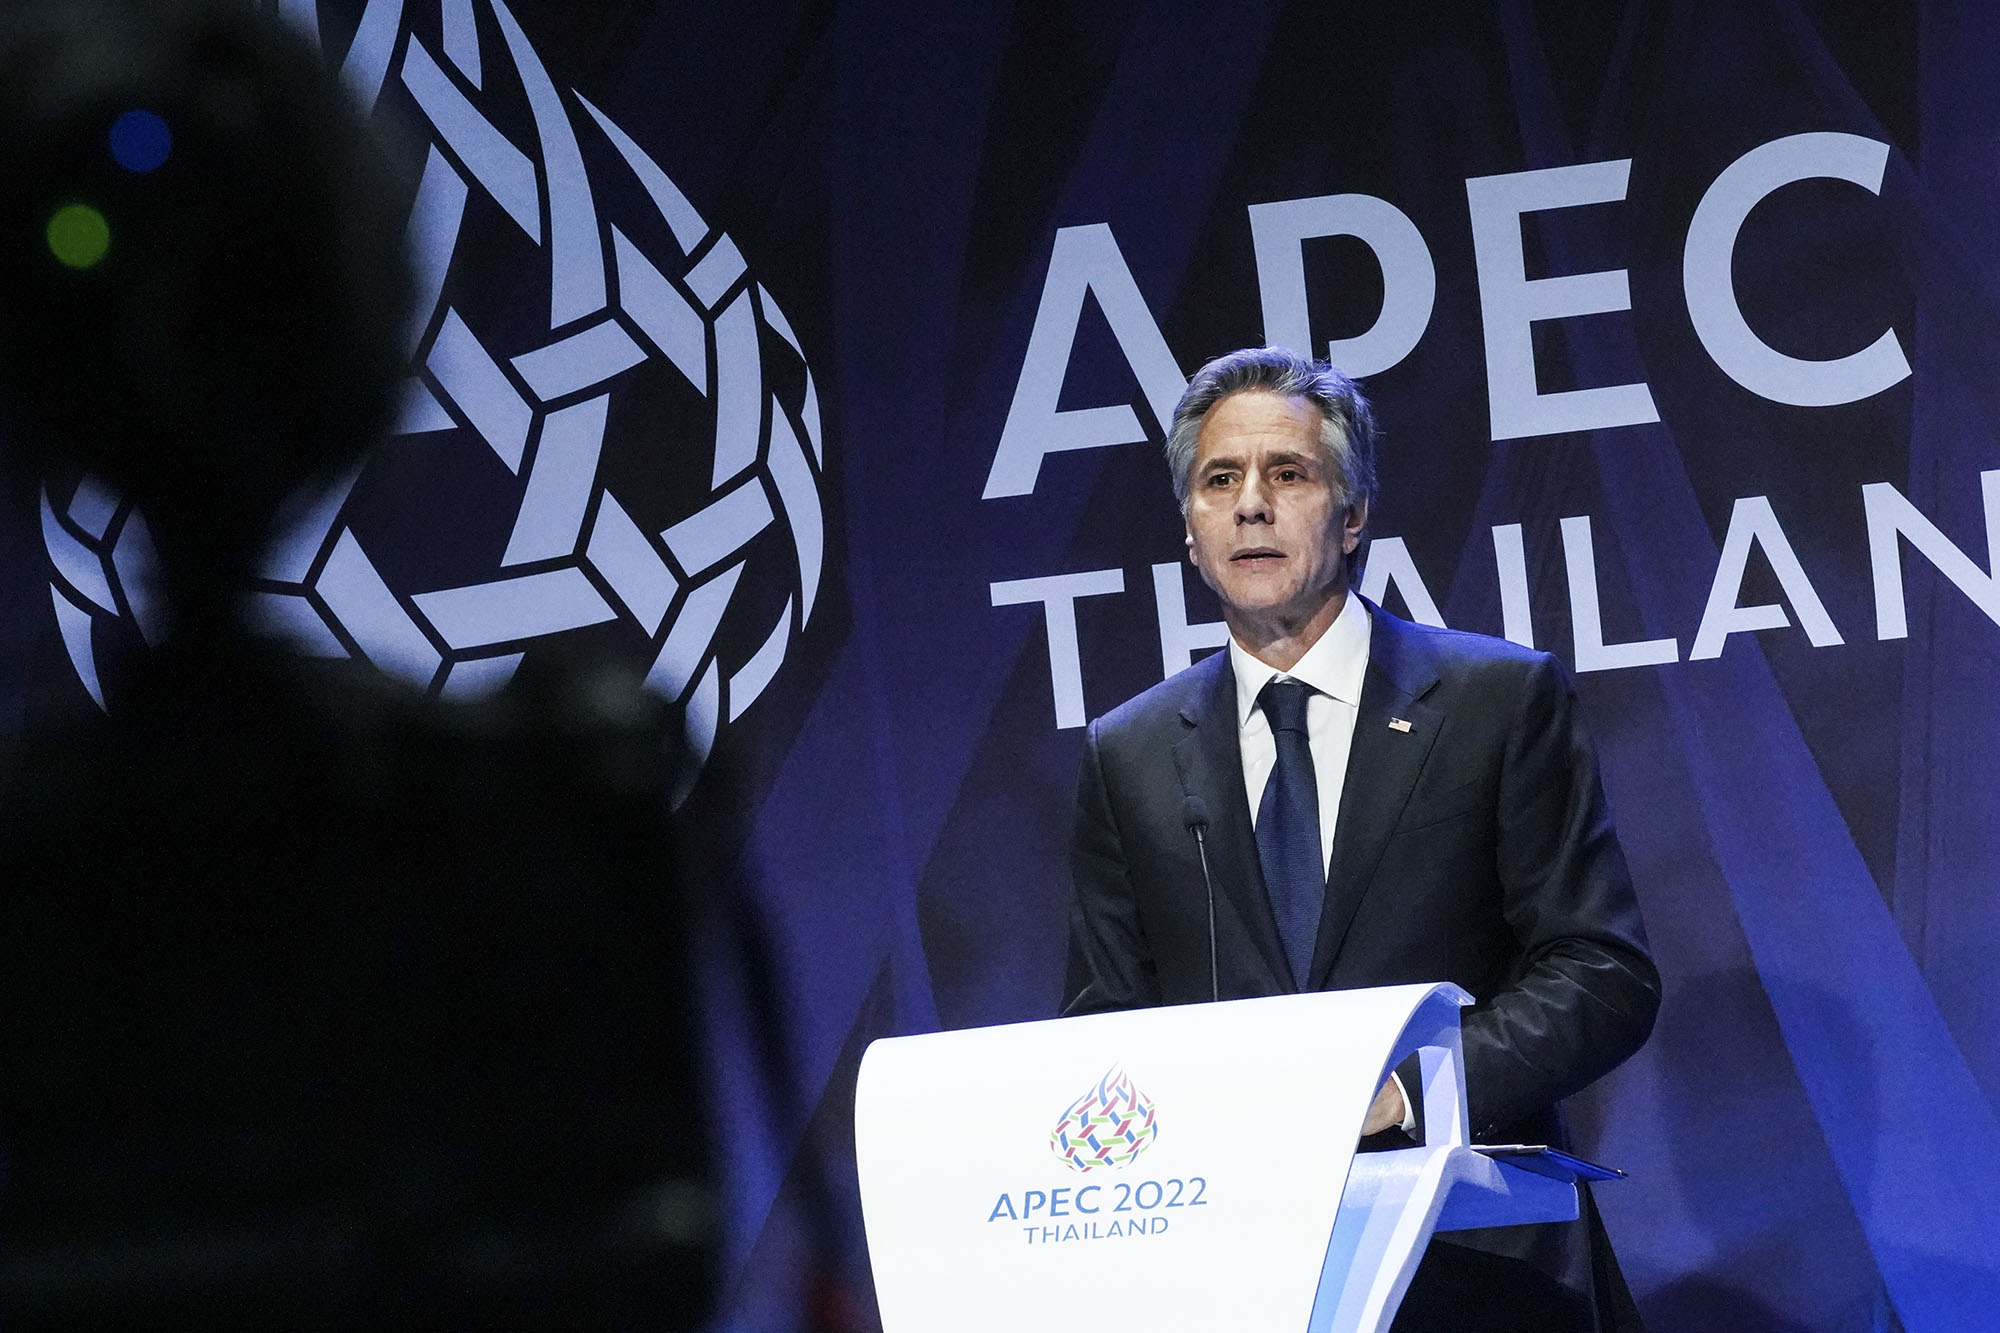 U.S. State Secretary Antony Blinken press conference during the Asia-Pacific Economic Cooperation (APEC) summit at the Queen Sirikit National Convention Center in Bangkok, Thailand, on November 17.